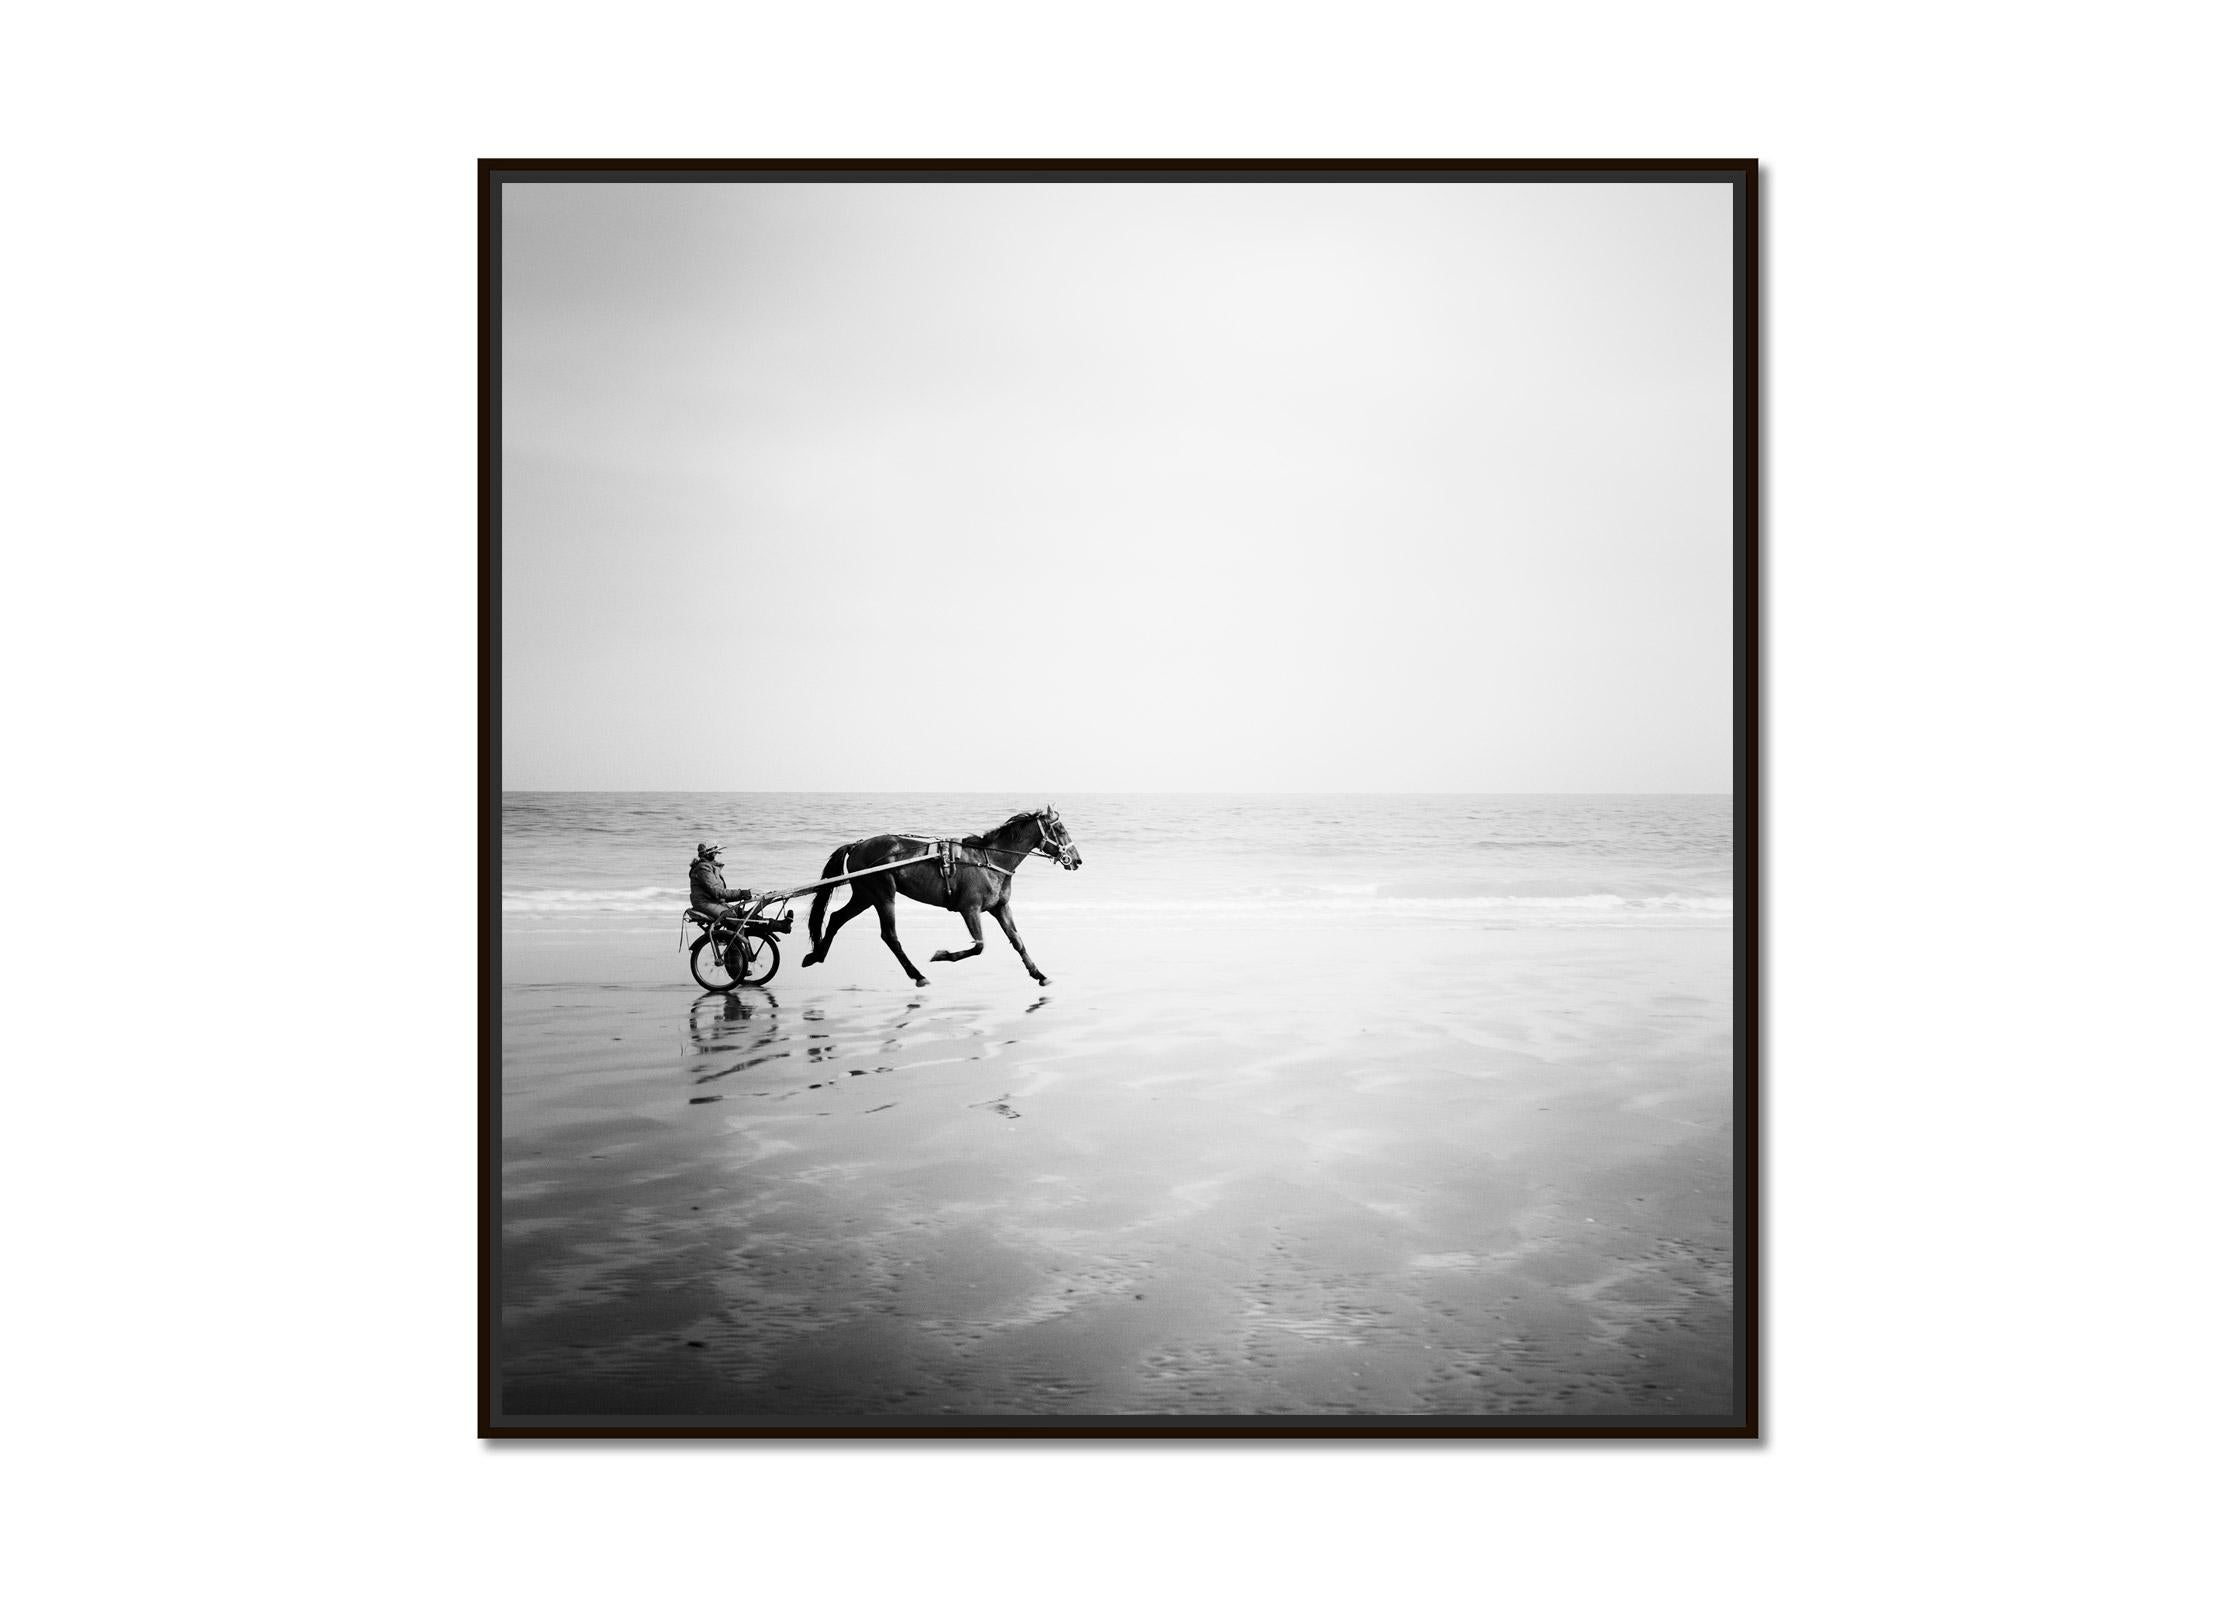 Harness Racing, France, Beach Normandie, France, black and white art photography - Photograph by Gerald Berghammer